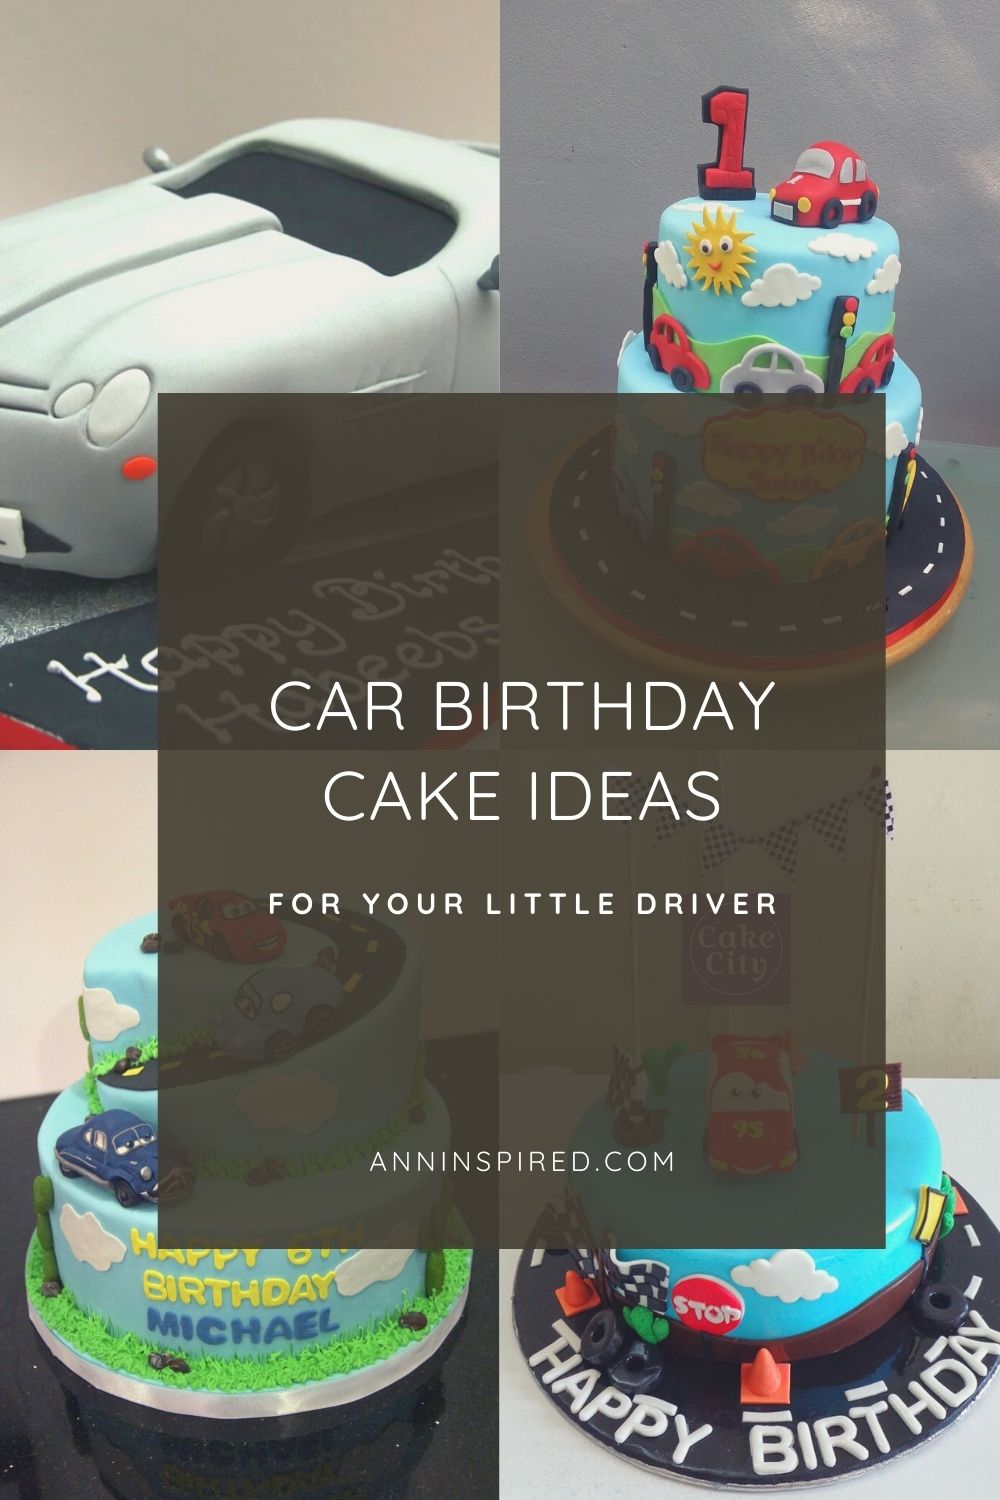 Best Car Birthday Cake Ideas for Your Little Driver